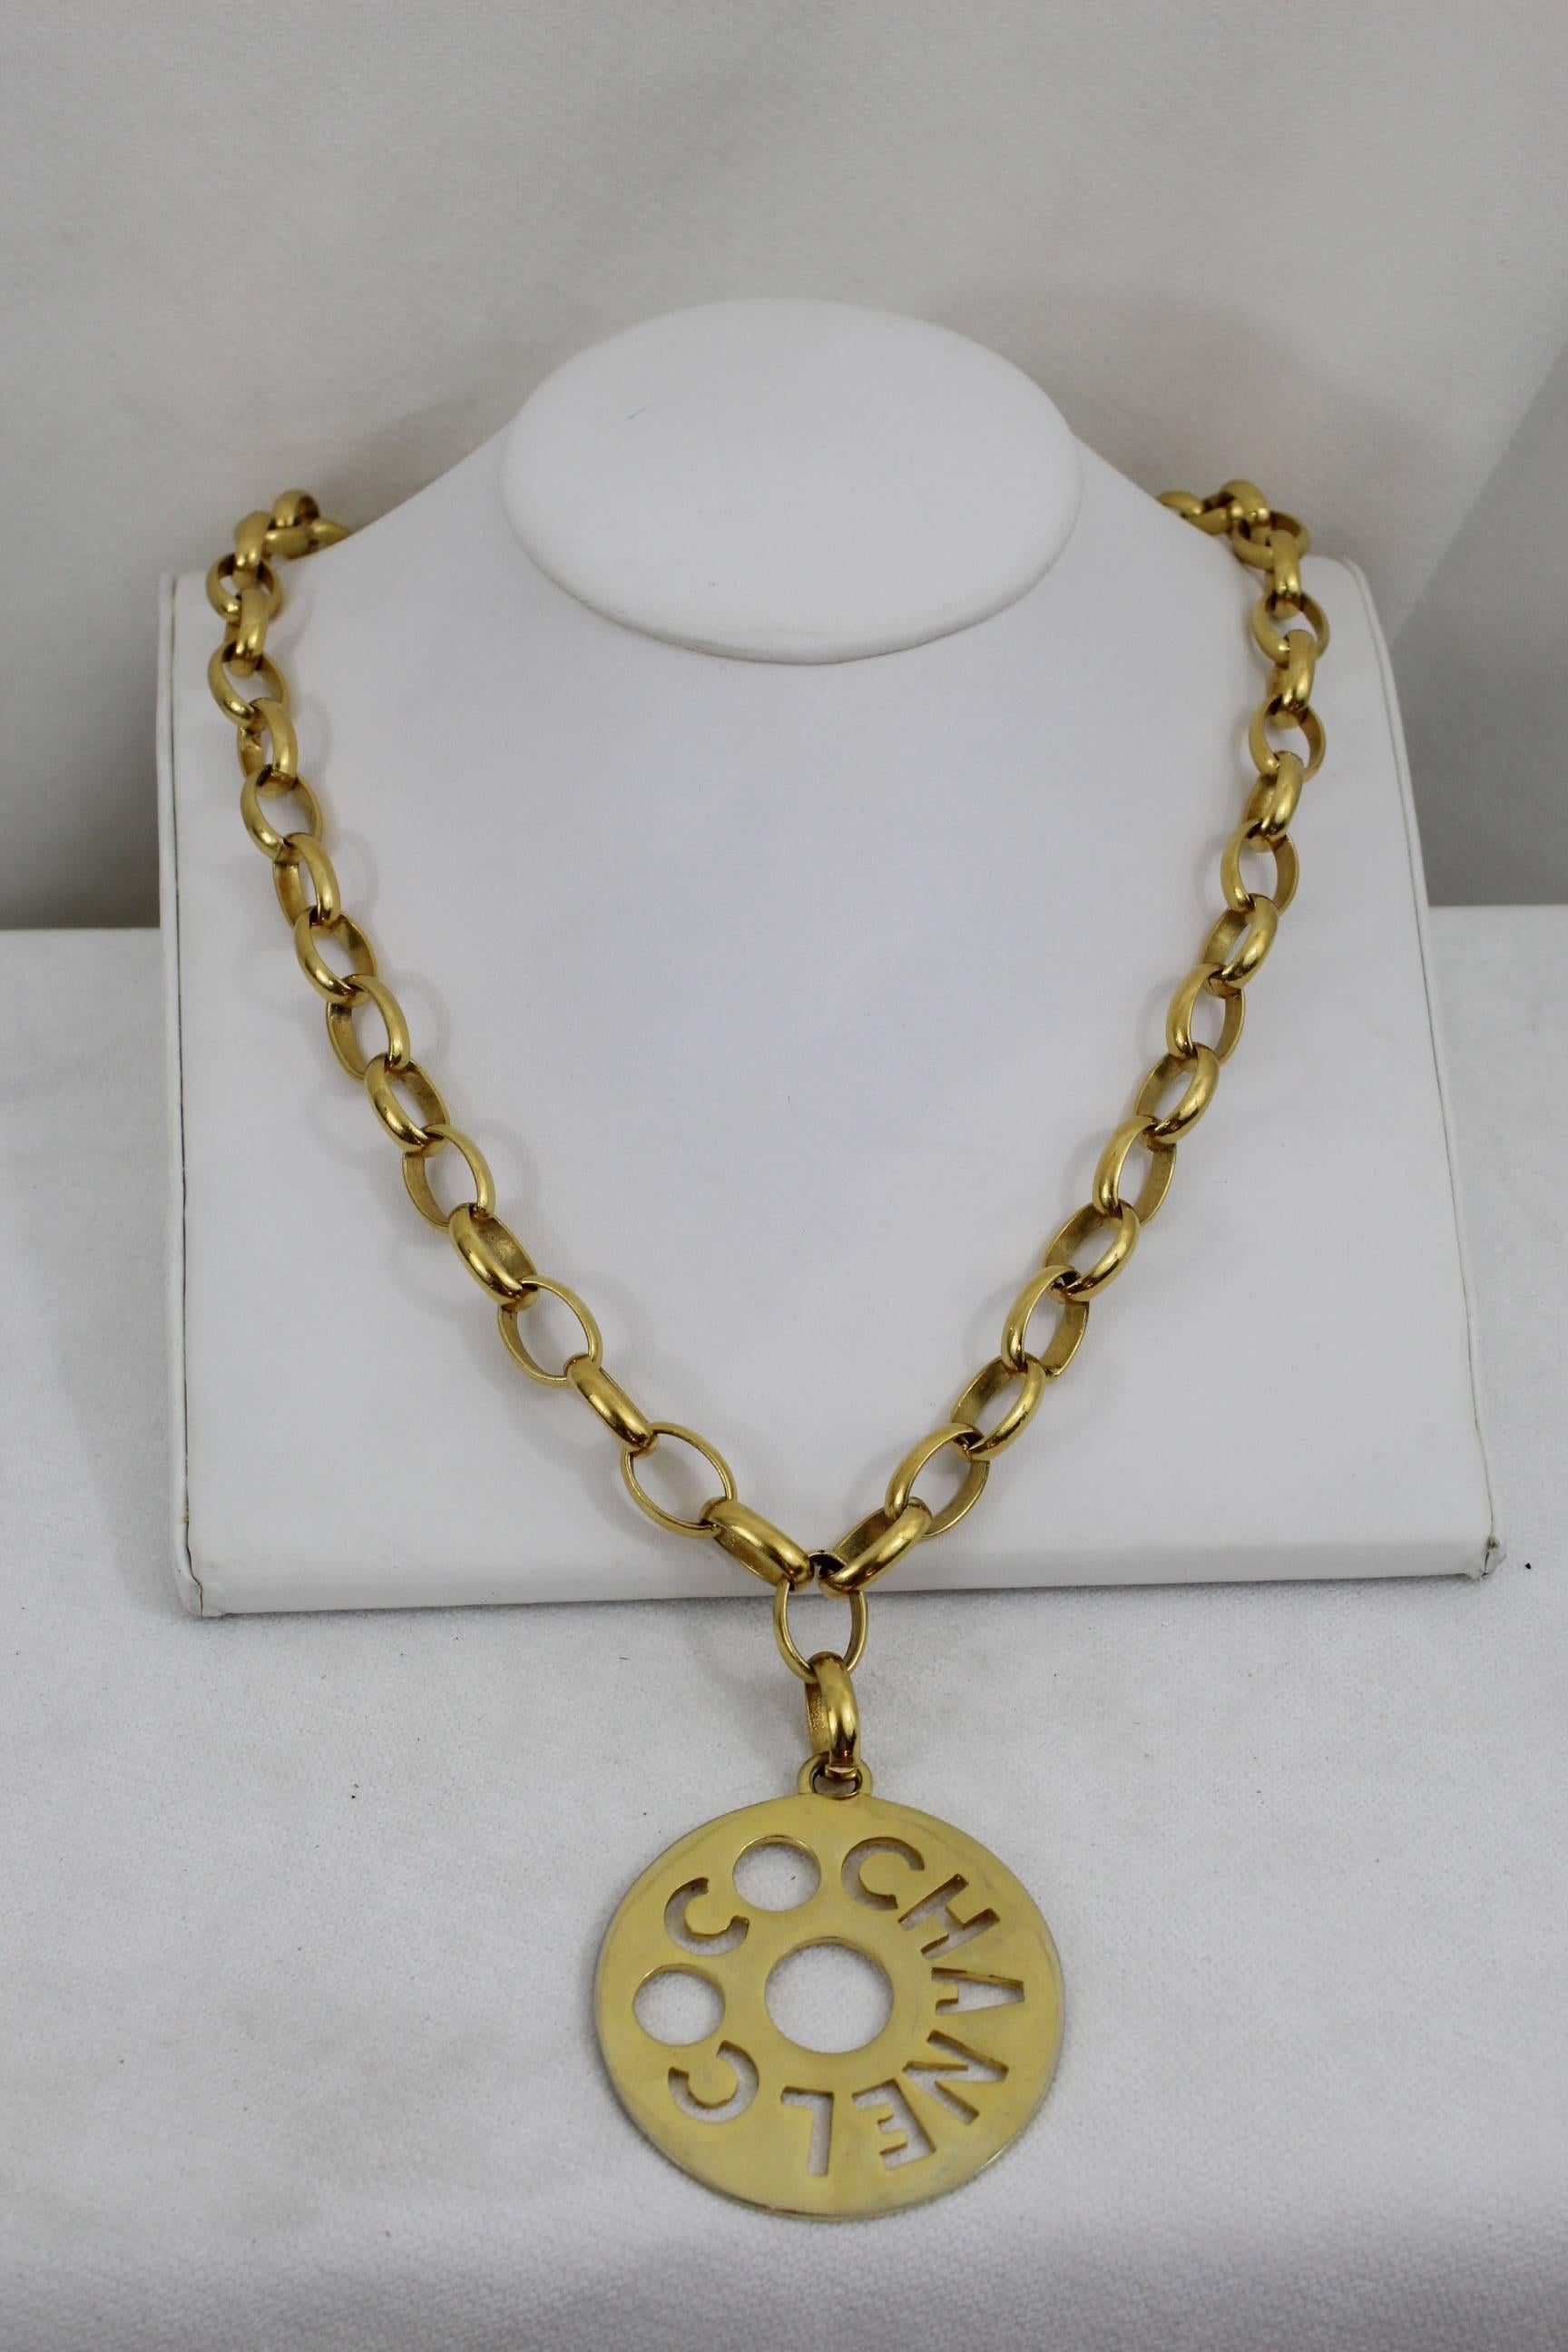 Really ncie and rare Coco Chanel Necklavce composed of a golden chain of 32 inche long and a Chanel pendant of 2,5 inches diameter ( aprox)

really nice, some signs of use in the pendant due to its age.

Signed in the clasp